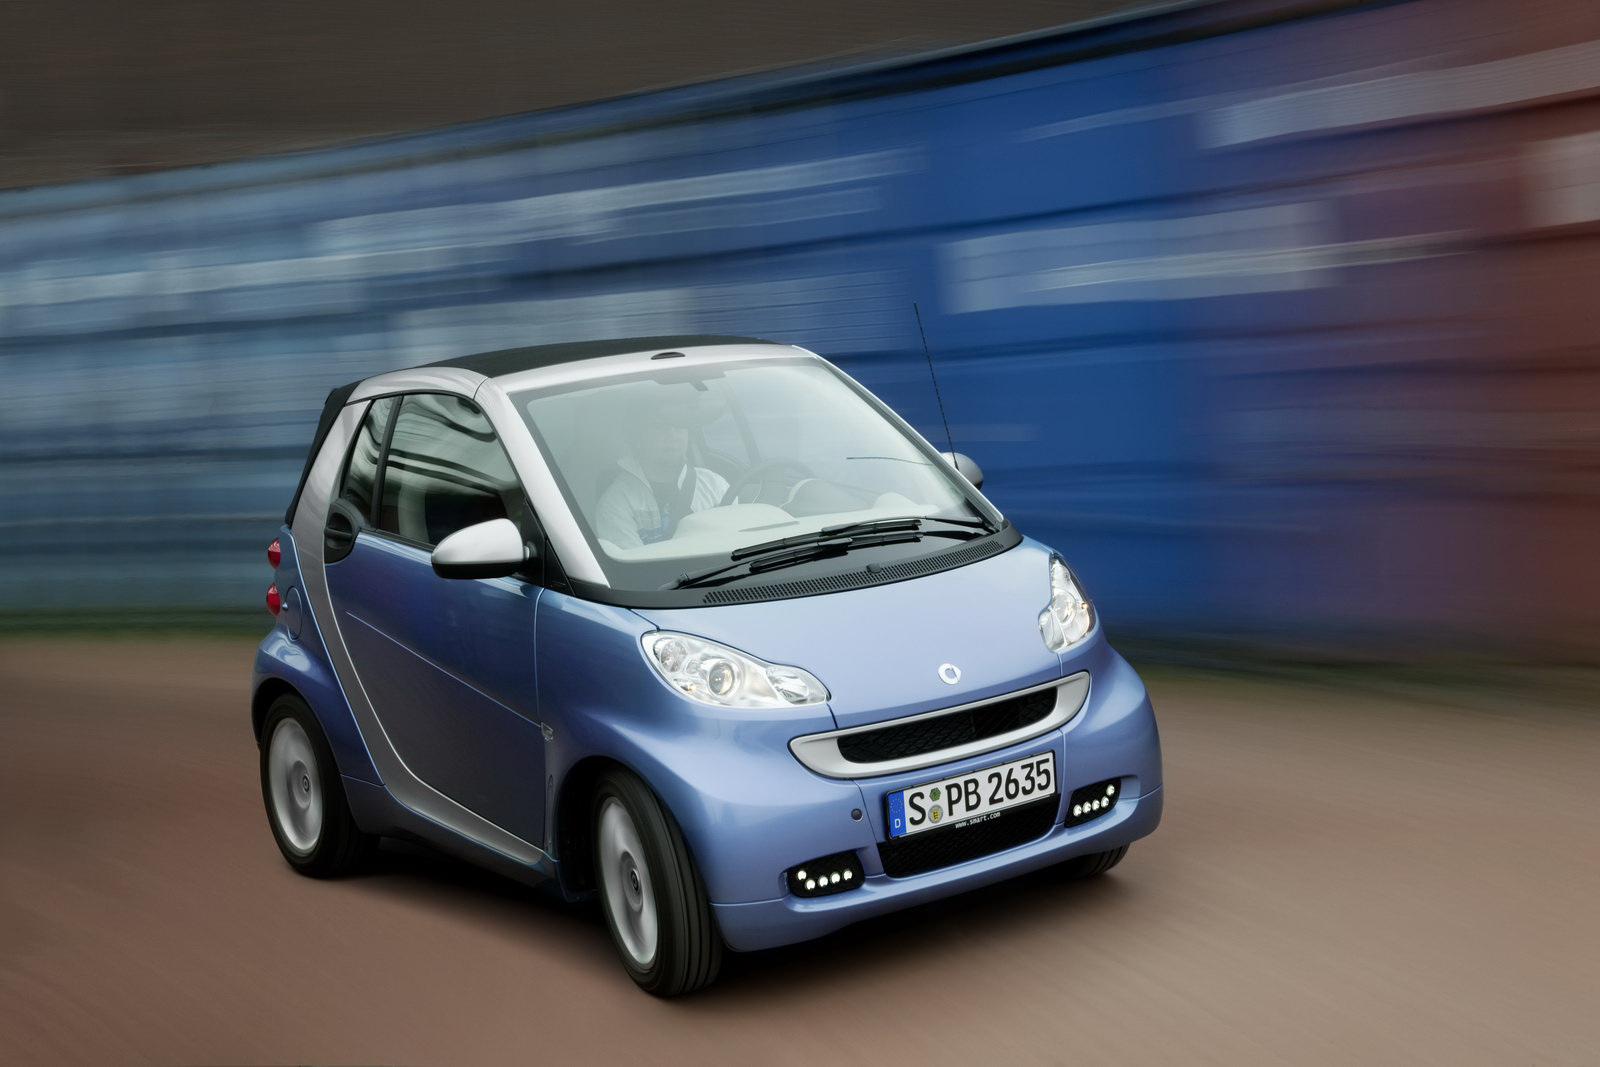 2011 Smart Fortwo Receives Minor Upgrades | Carscoops